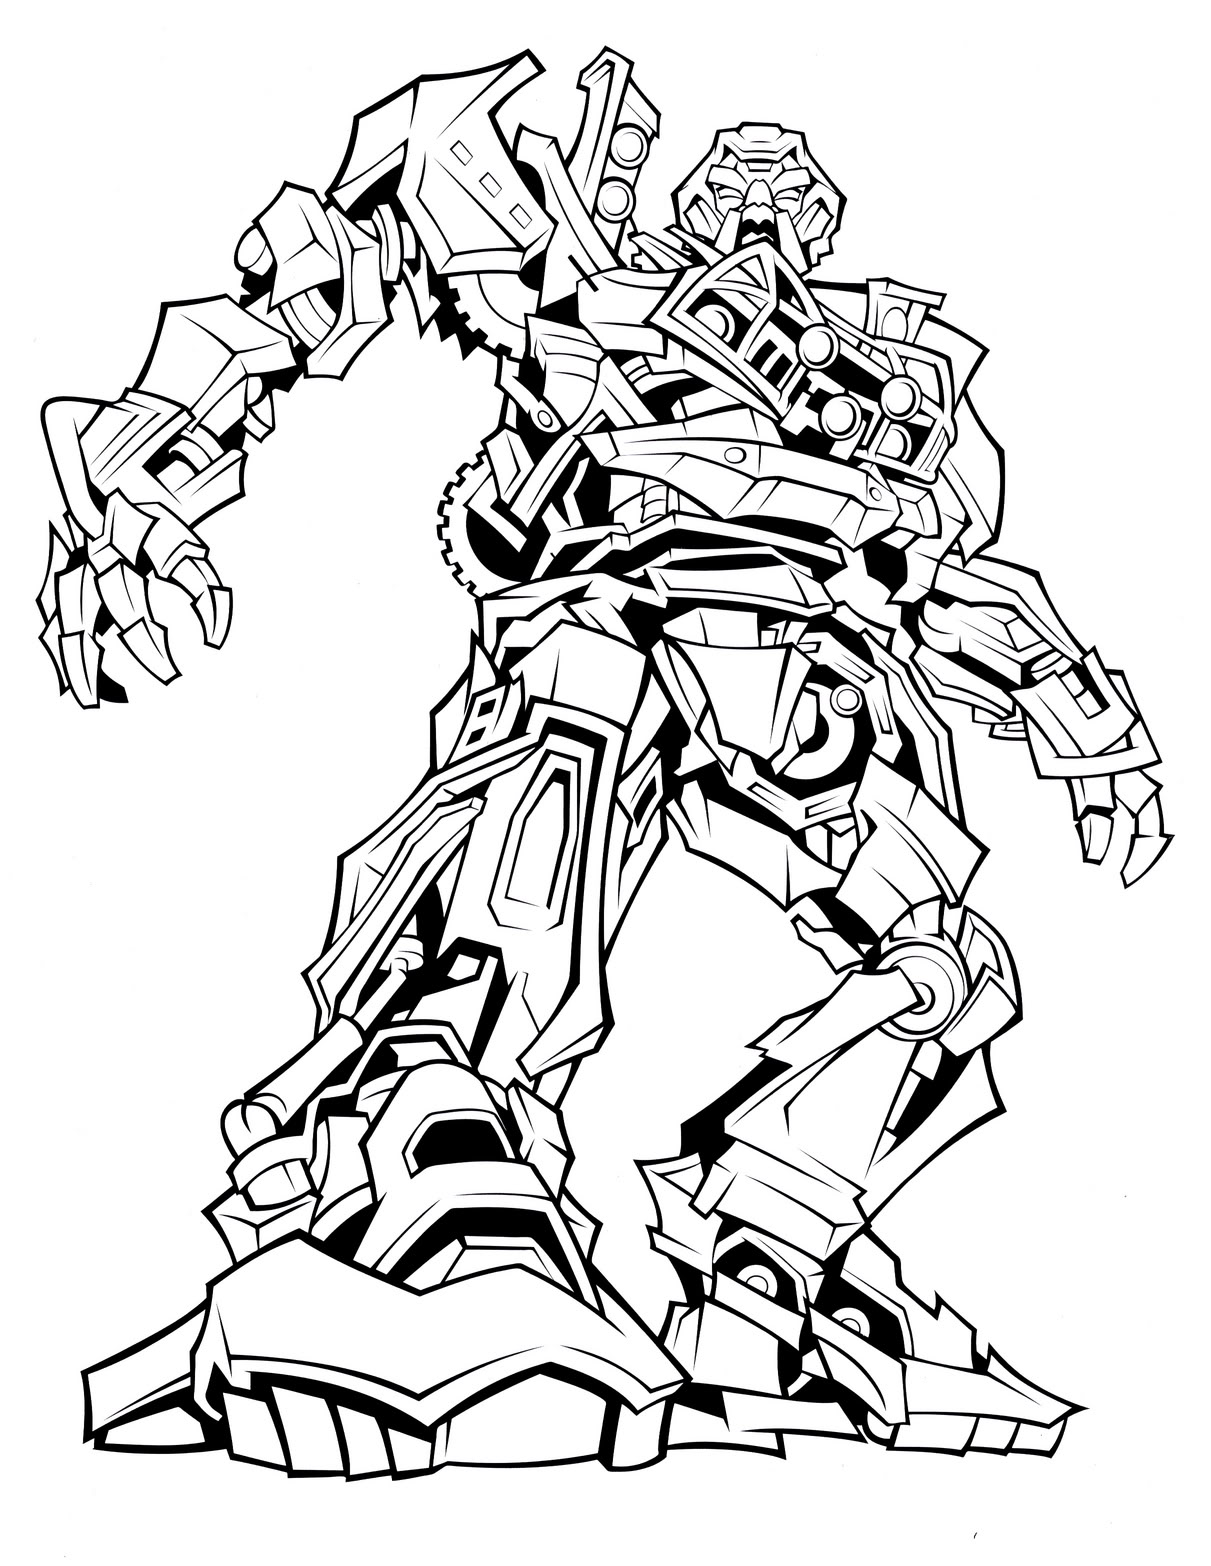 Ratchet from Transformers Coloring Pages